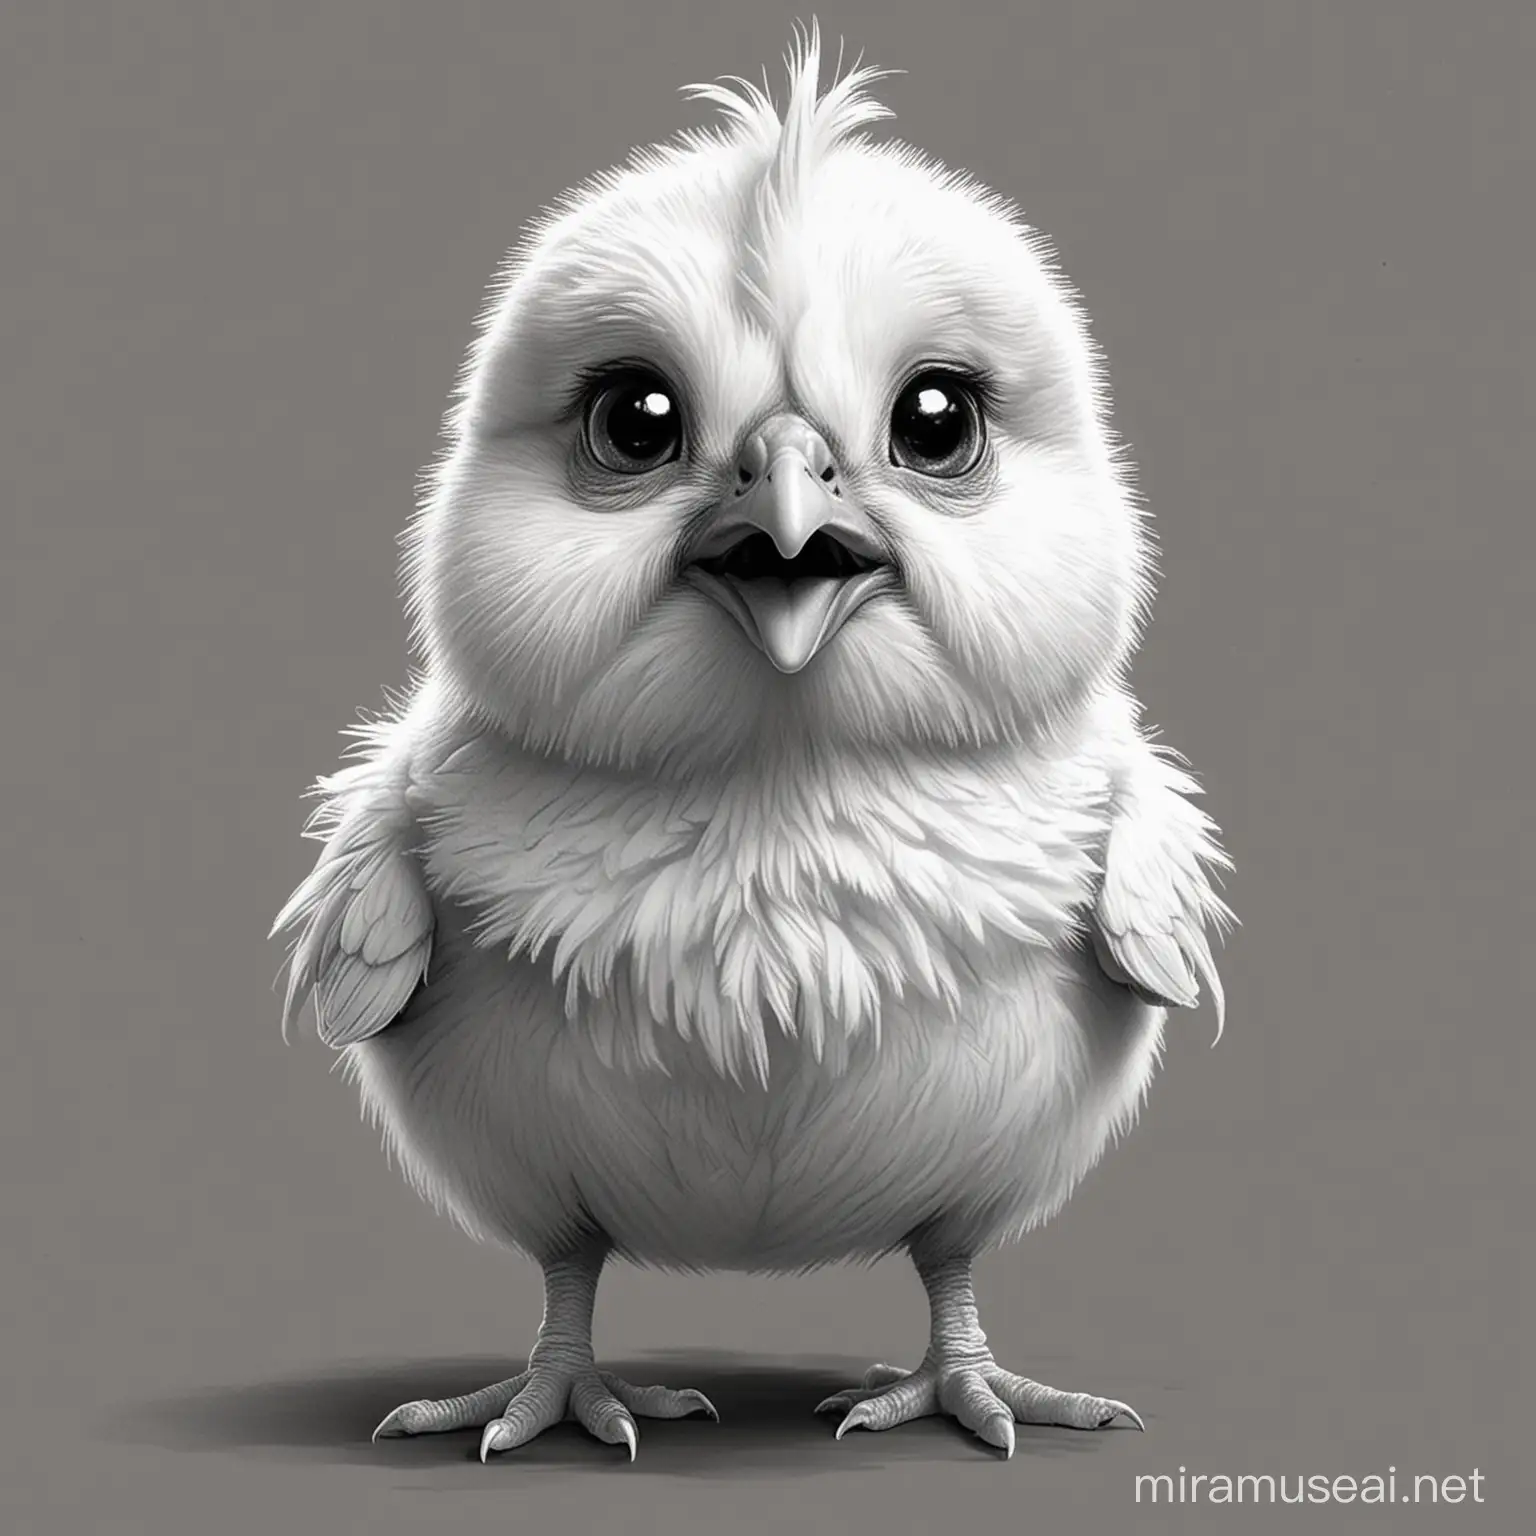 Adorable Sketch of a Fearful Male Chicken